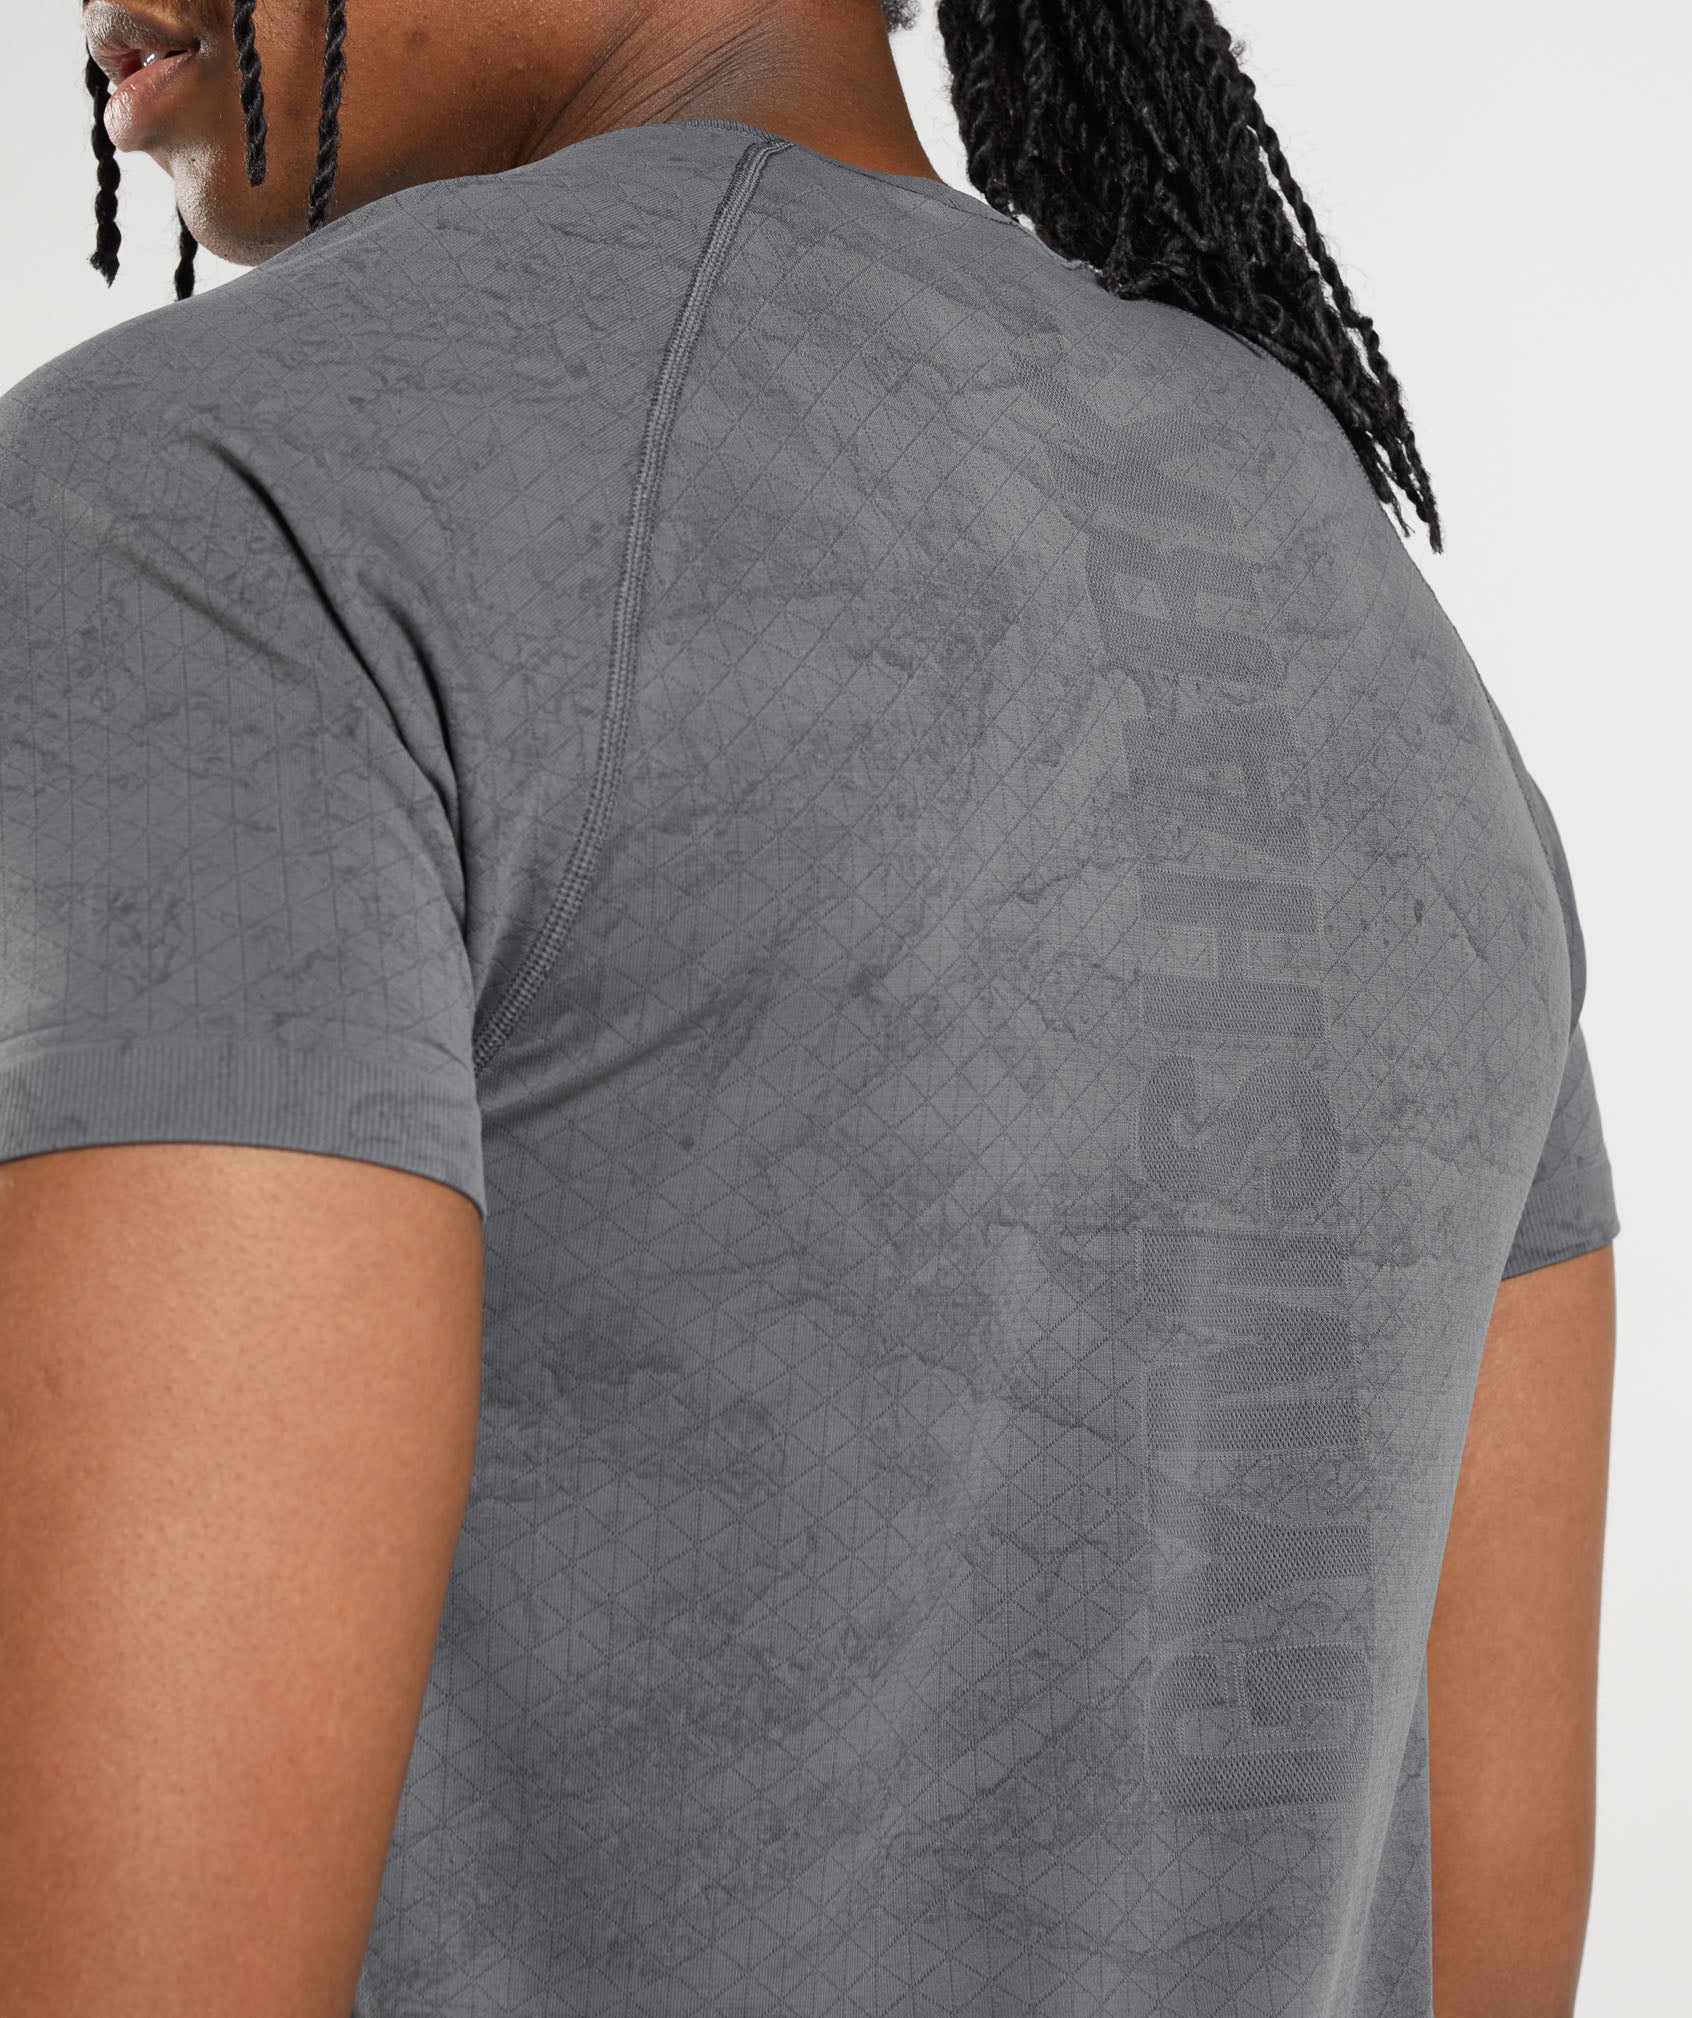 Geo Seamless T-Shirt in Charcoal Grey/Black - view 6